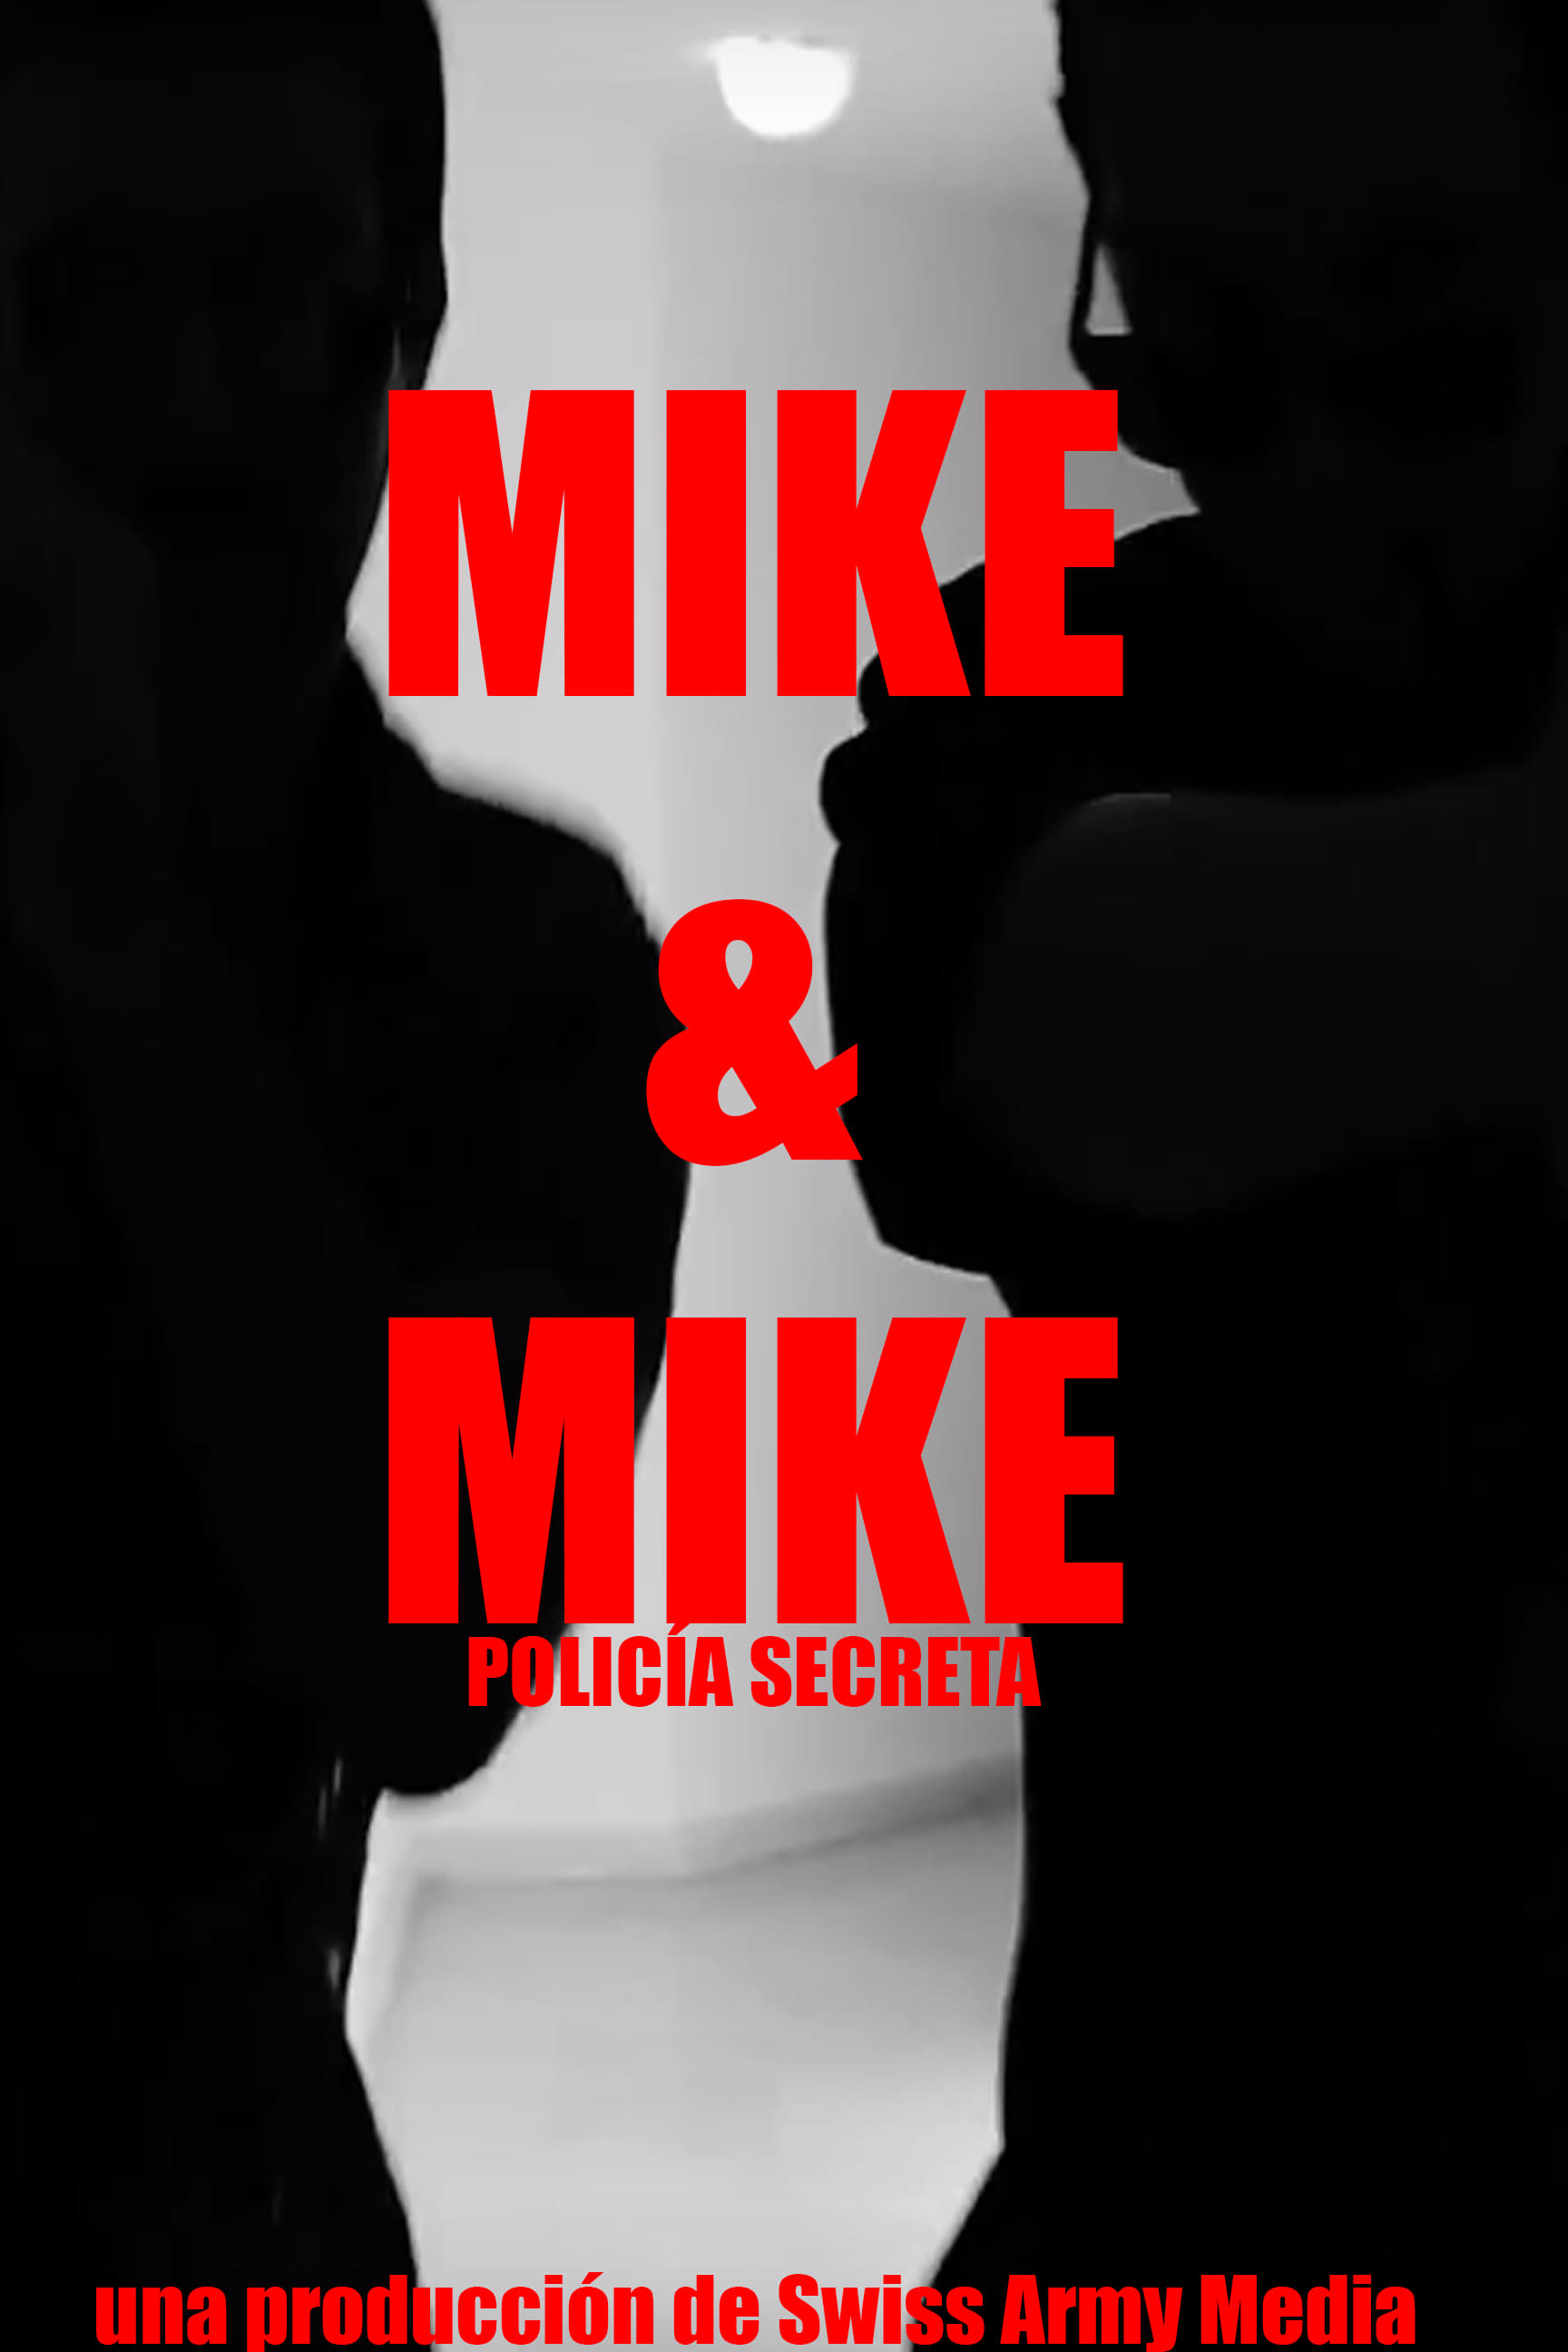 Mike & Mike - Secret Police